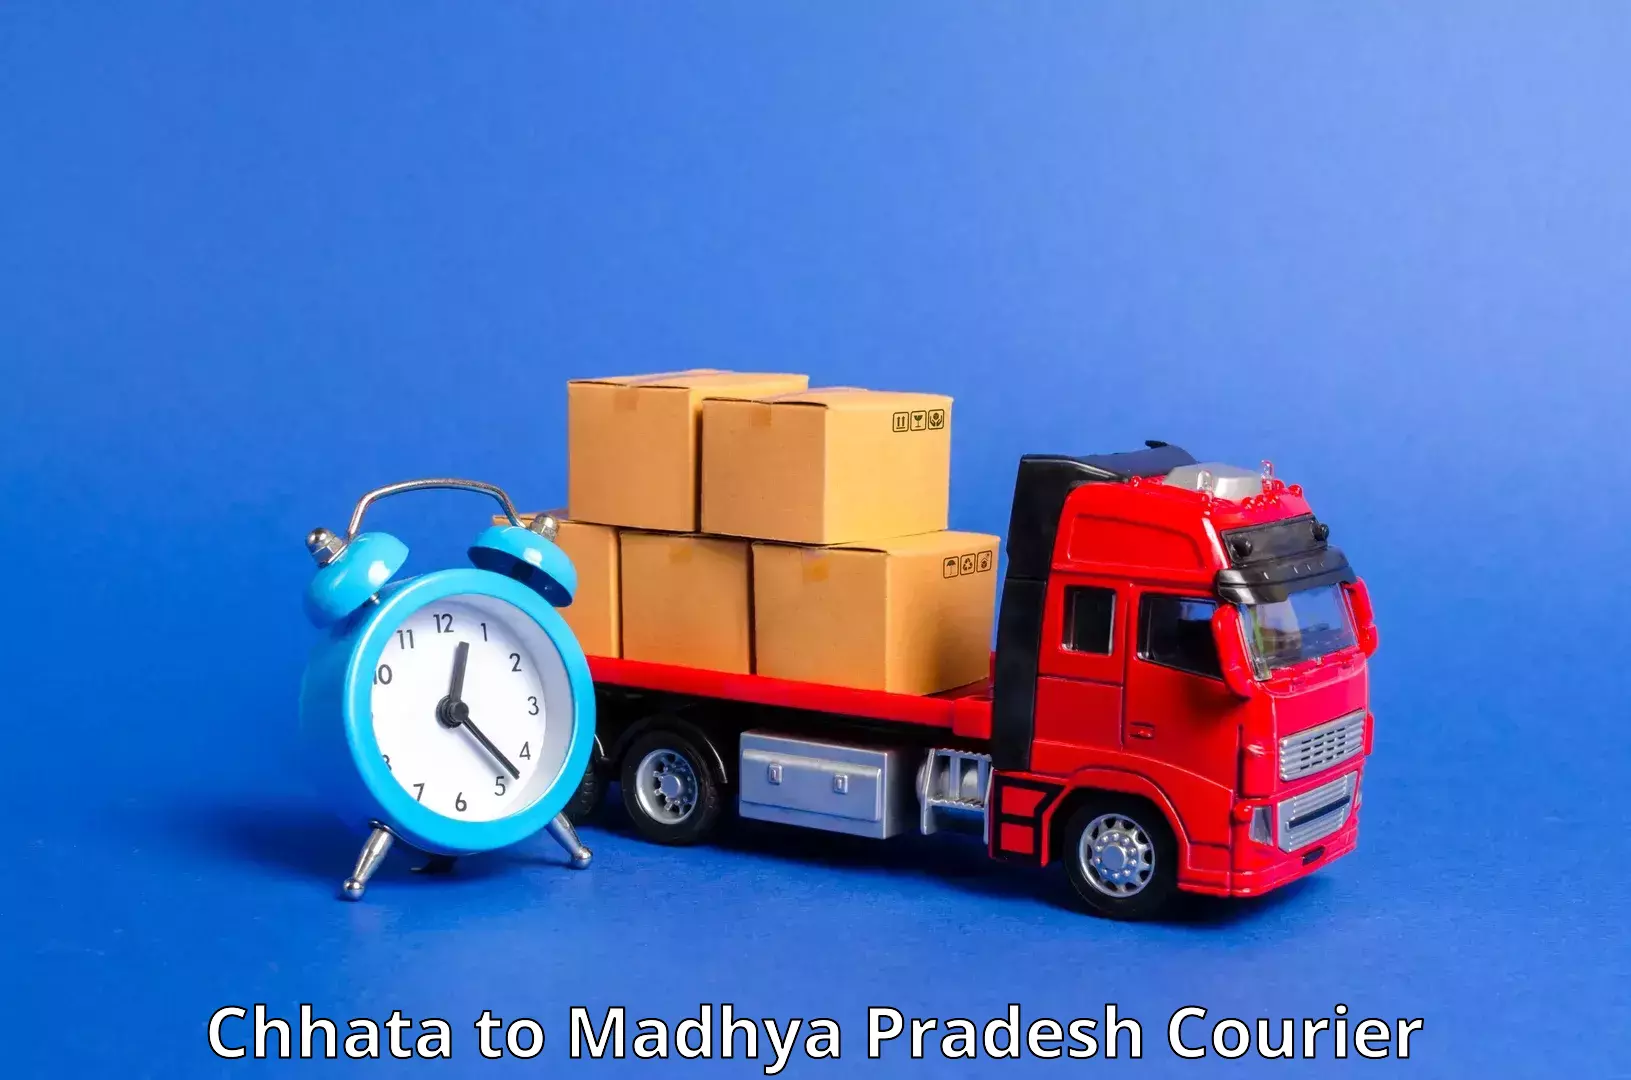 Round-the-clock parcel delivery in Chhata to Sironj